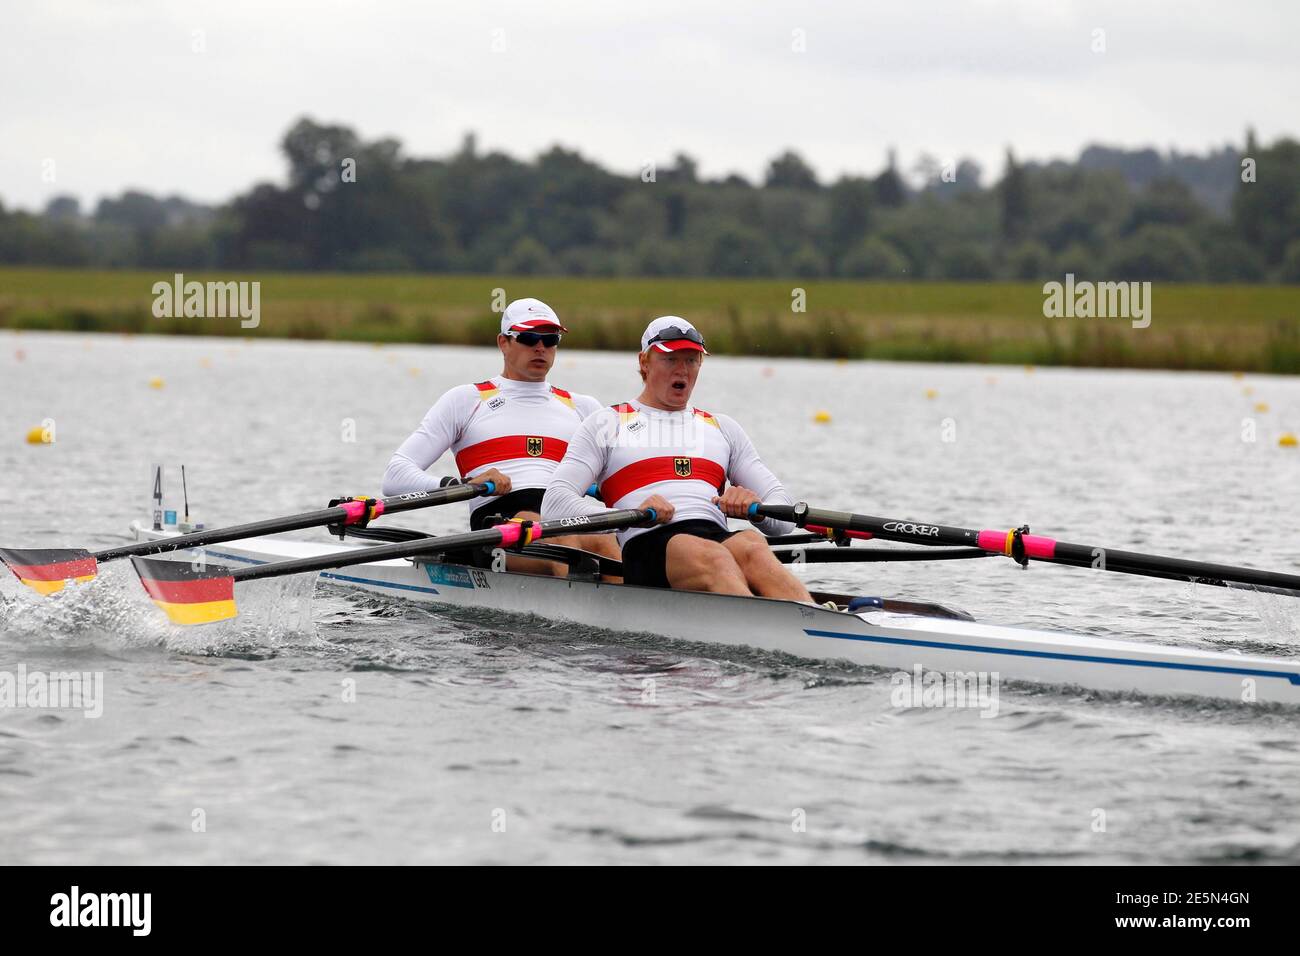 Germany's Eric Knittel and Stephan Krueger compete in the men's double sculls semifinal at the London 2012 Olympic Games at Eton Dorney, west of London July 31, 2012. REUTERS/Darren Whiteside (BRITAIN  - Tags: SPORT OLYMPICS ROWING) Stock Photo